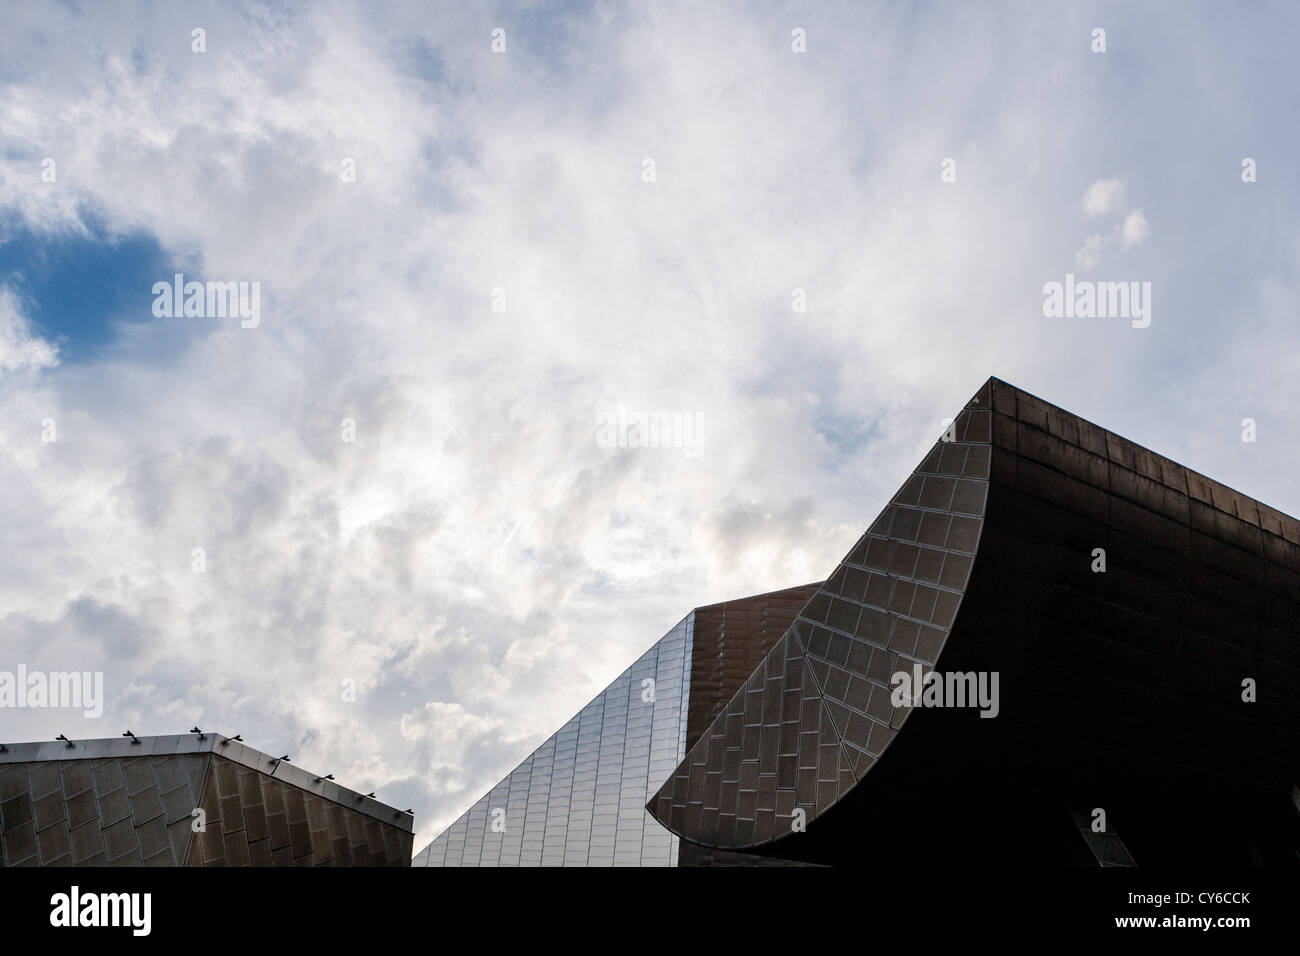 Image of the sculptural structure of The Lowry, juxtaposed with Sky. Stock Photo